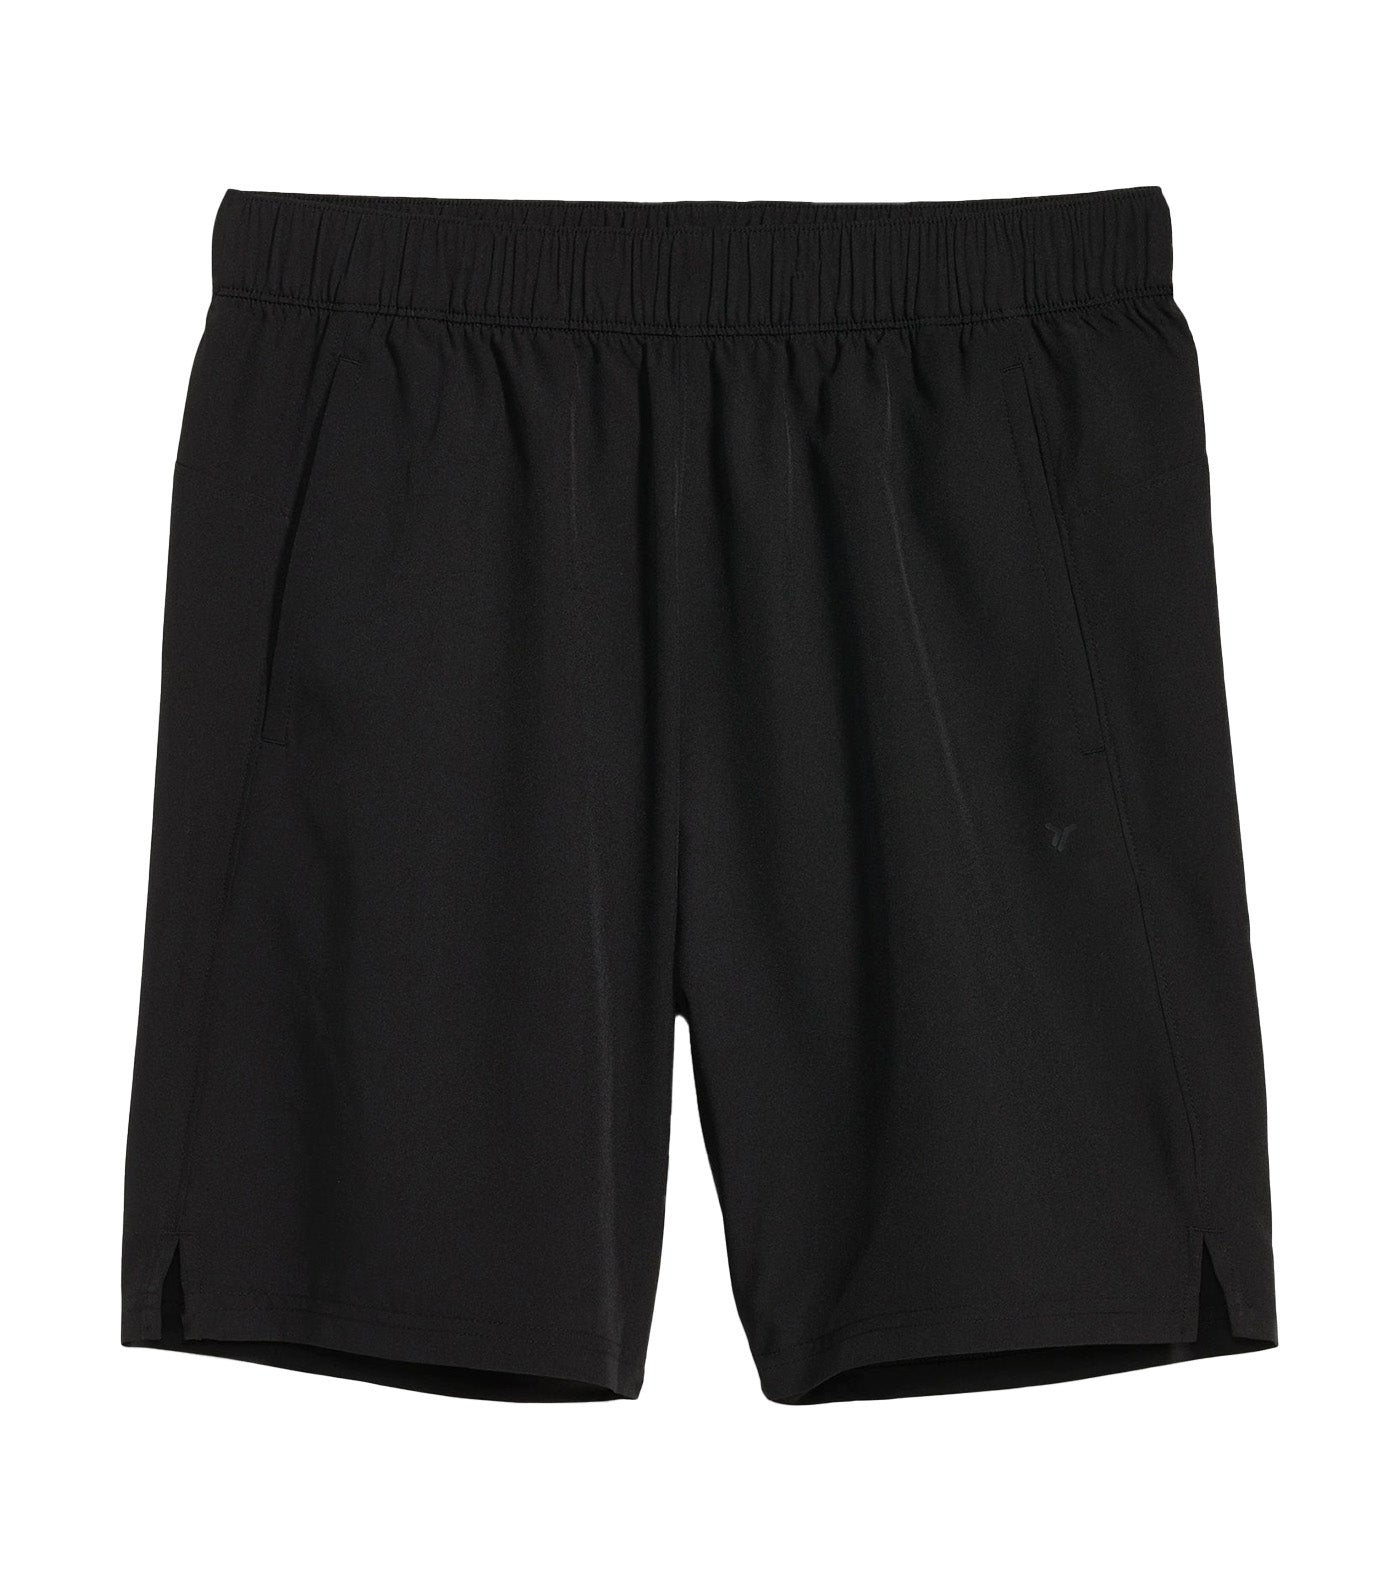 Essential Woven Workout Shorts for Men 9-inch Inseam Black Jack